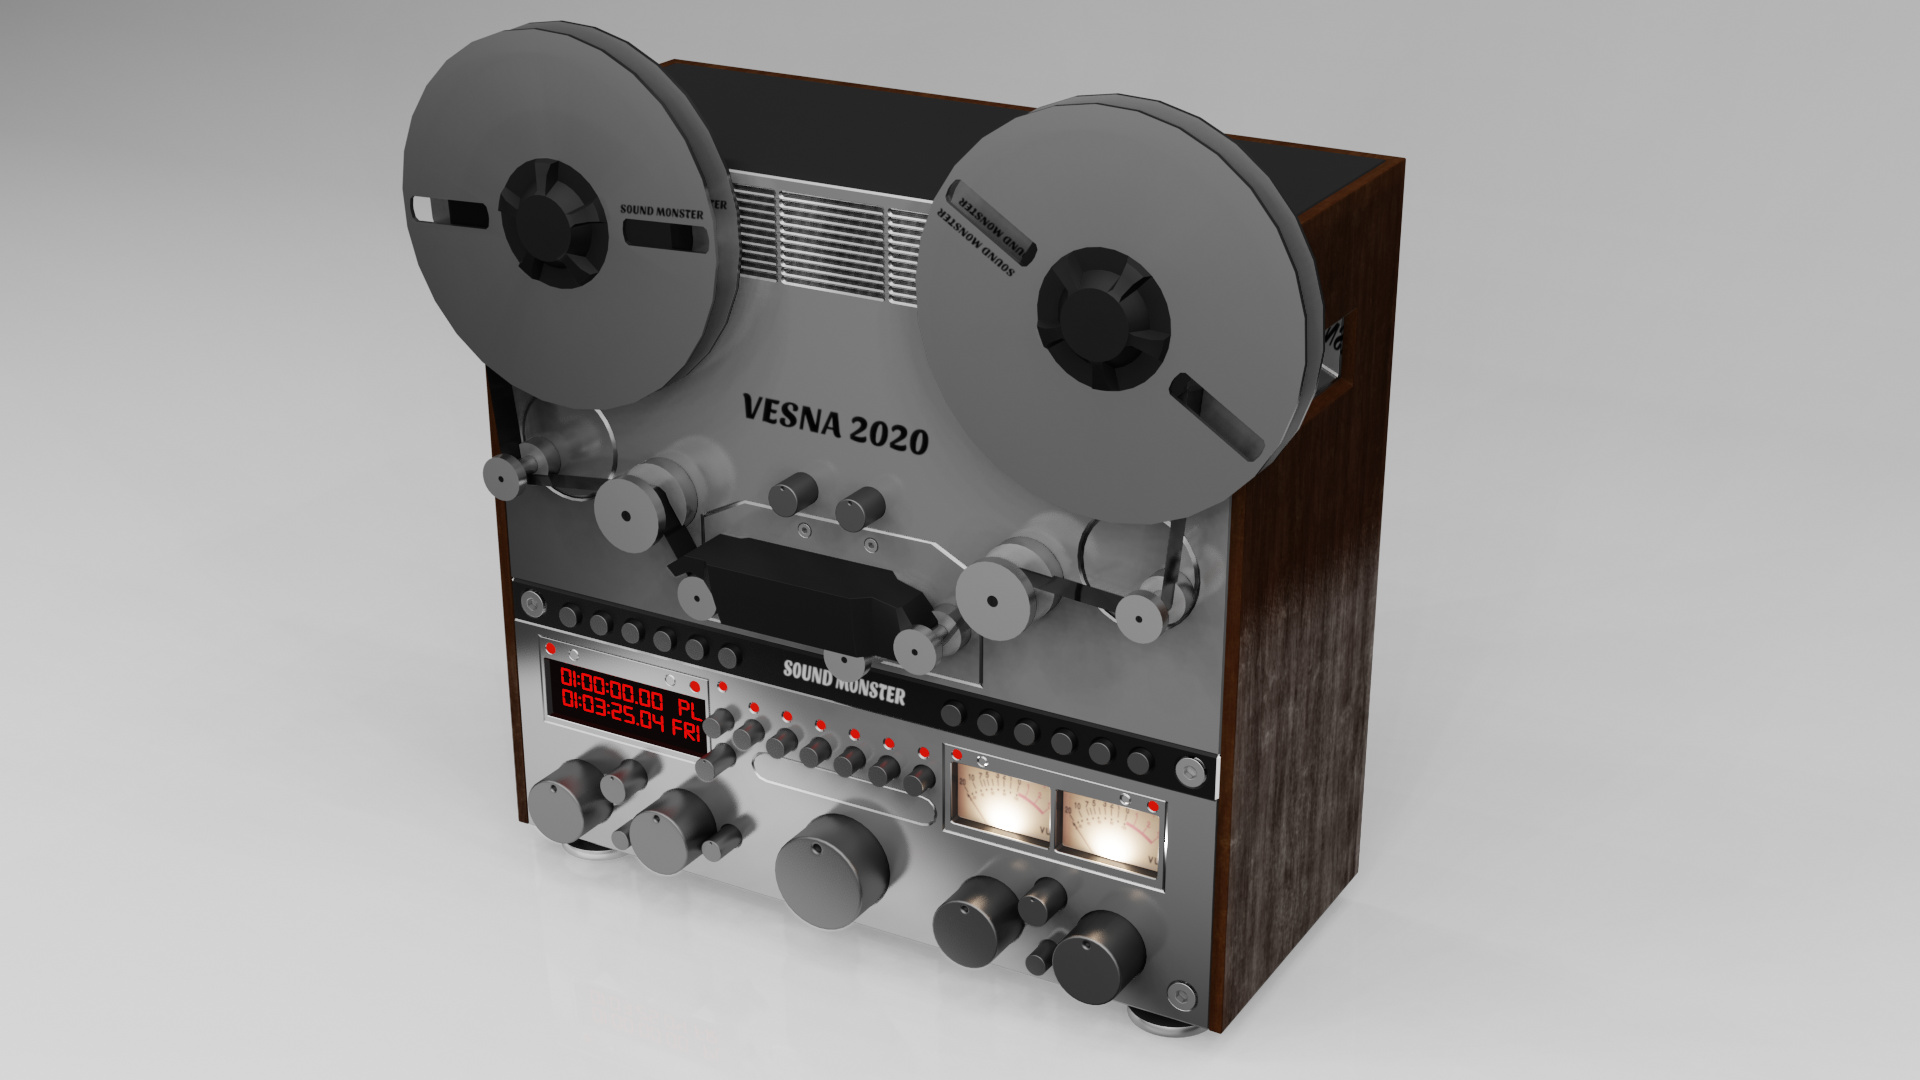 Reel tape recorder - Finished Projects - Blender Artists Community